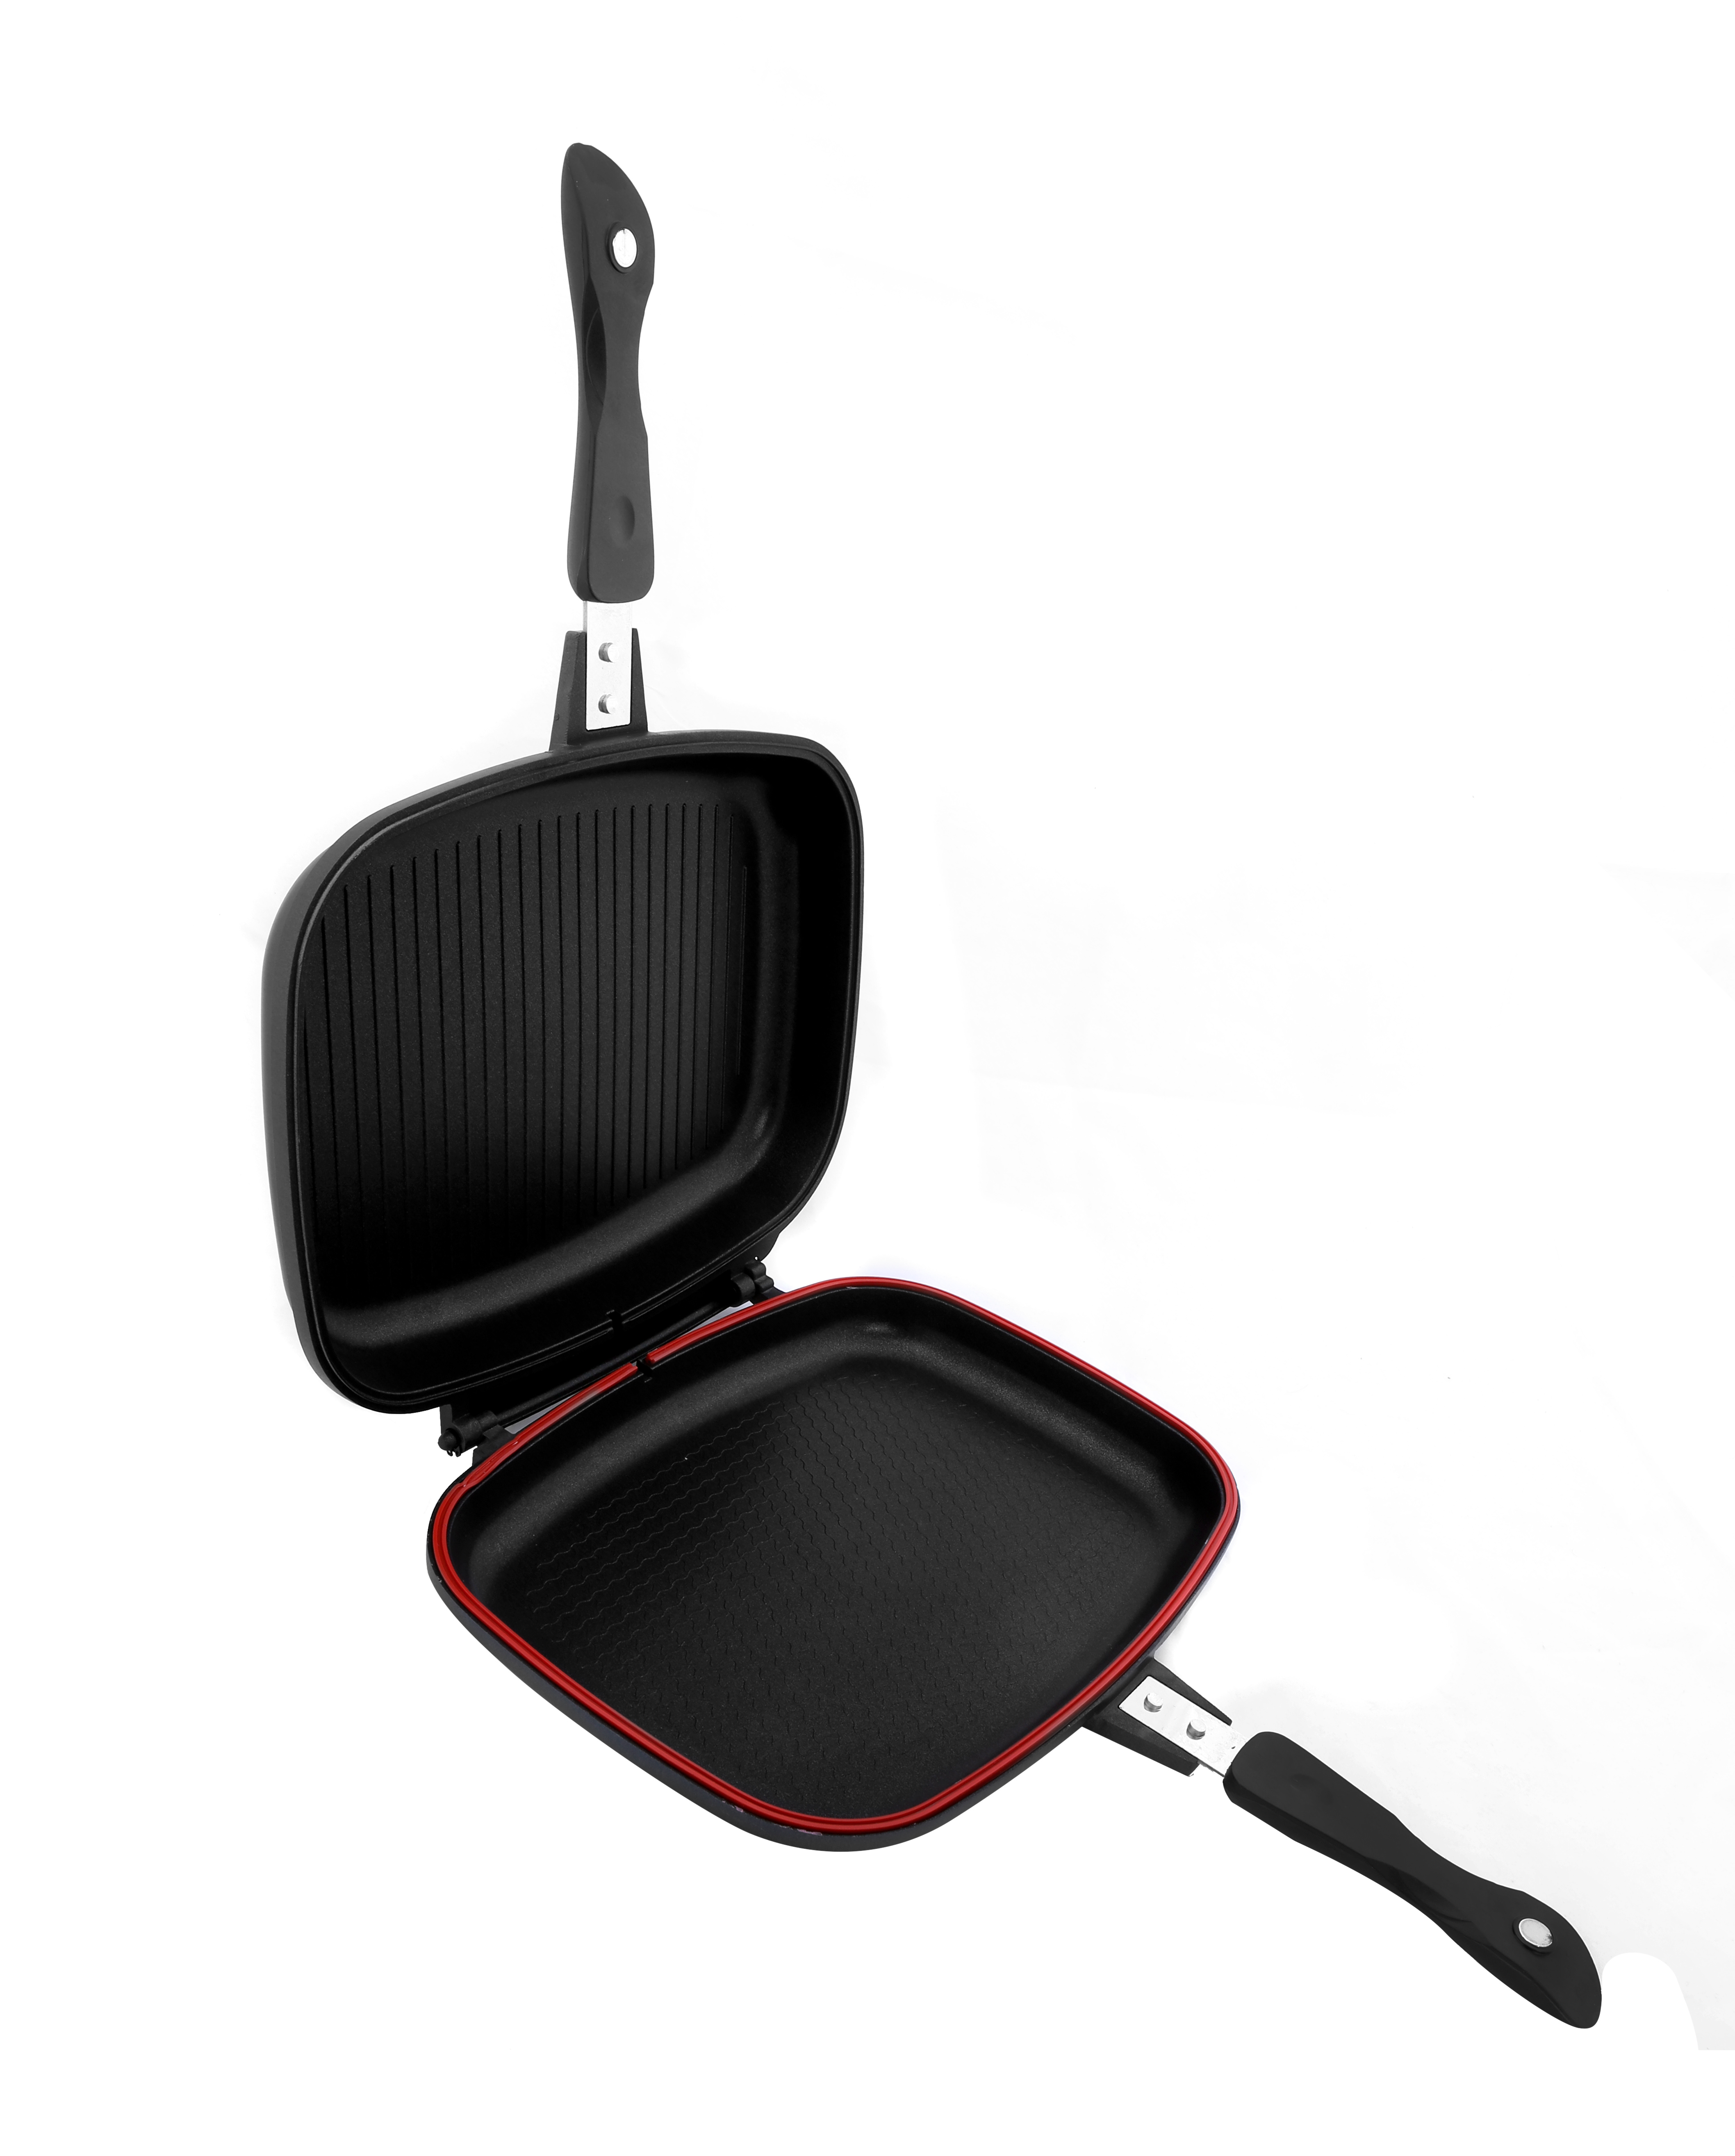 DOUBLE SIDED GRILL FRYING MAGIC PAN 32CM DIE-CAST FOLDABLE FLIPPING GRILL 